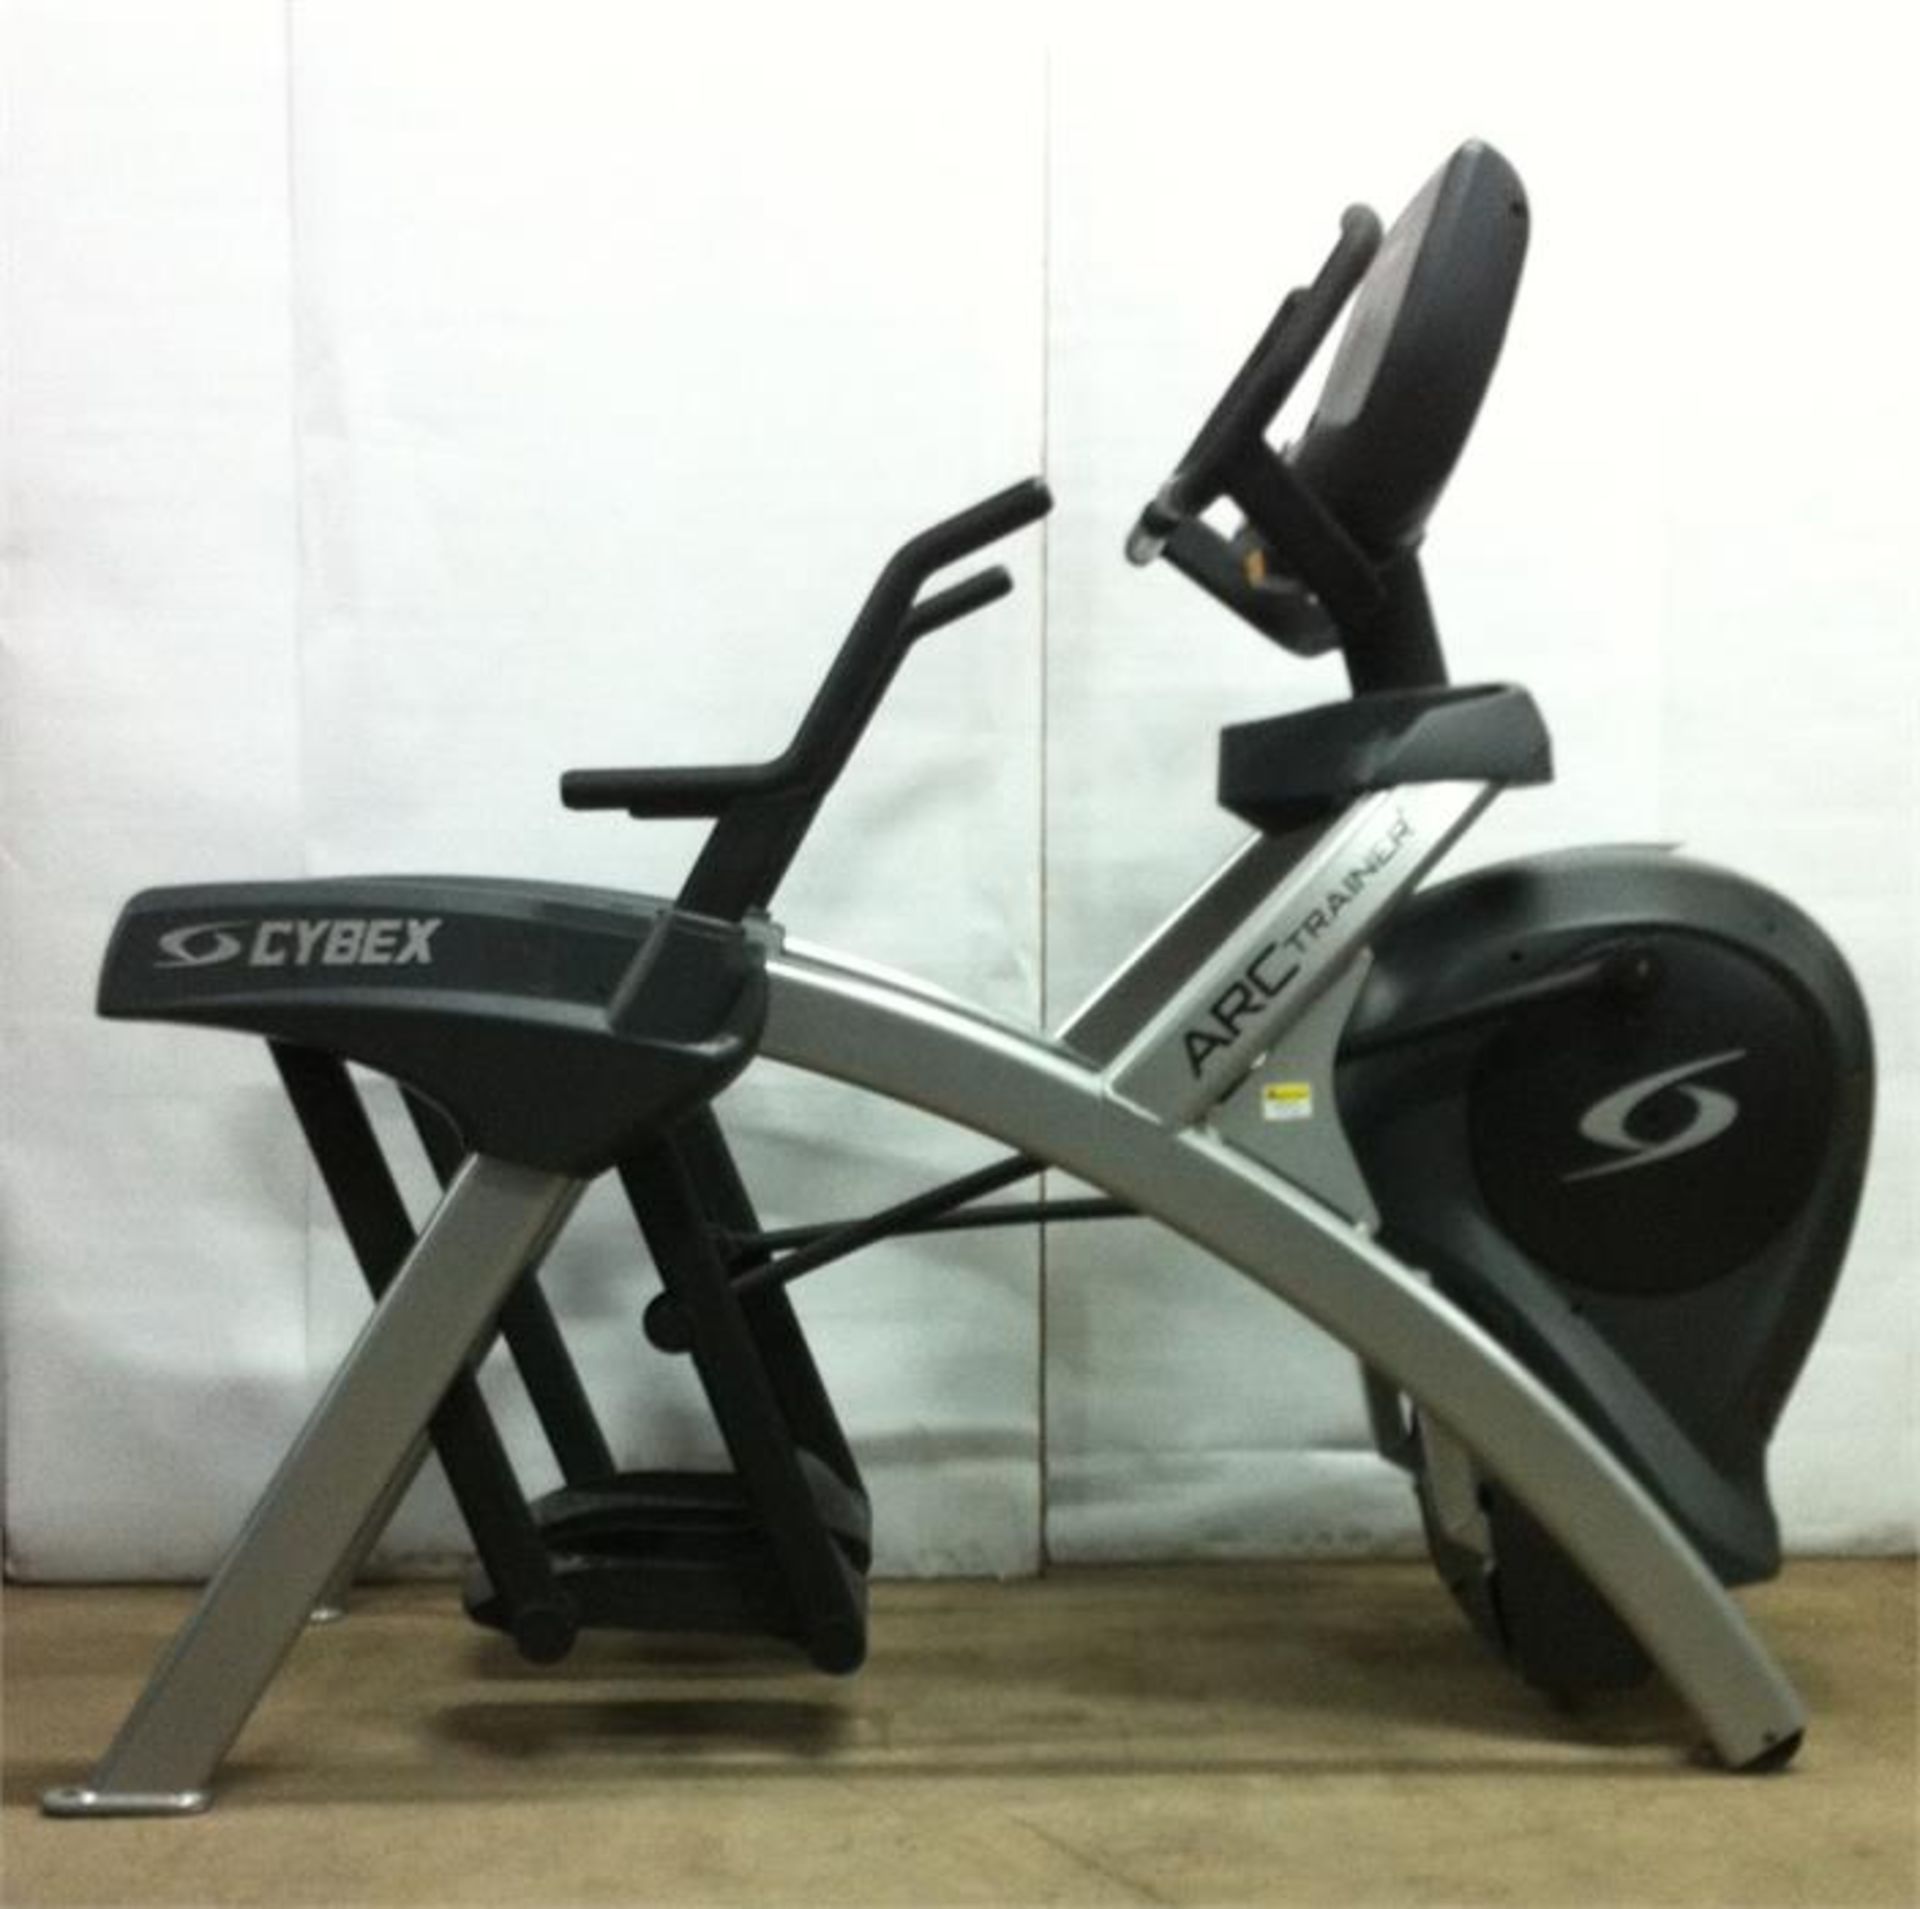 Cybex 625A Total Body Arc Trainer - Image 5 of 8